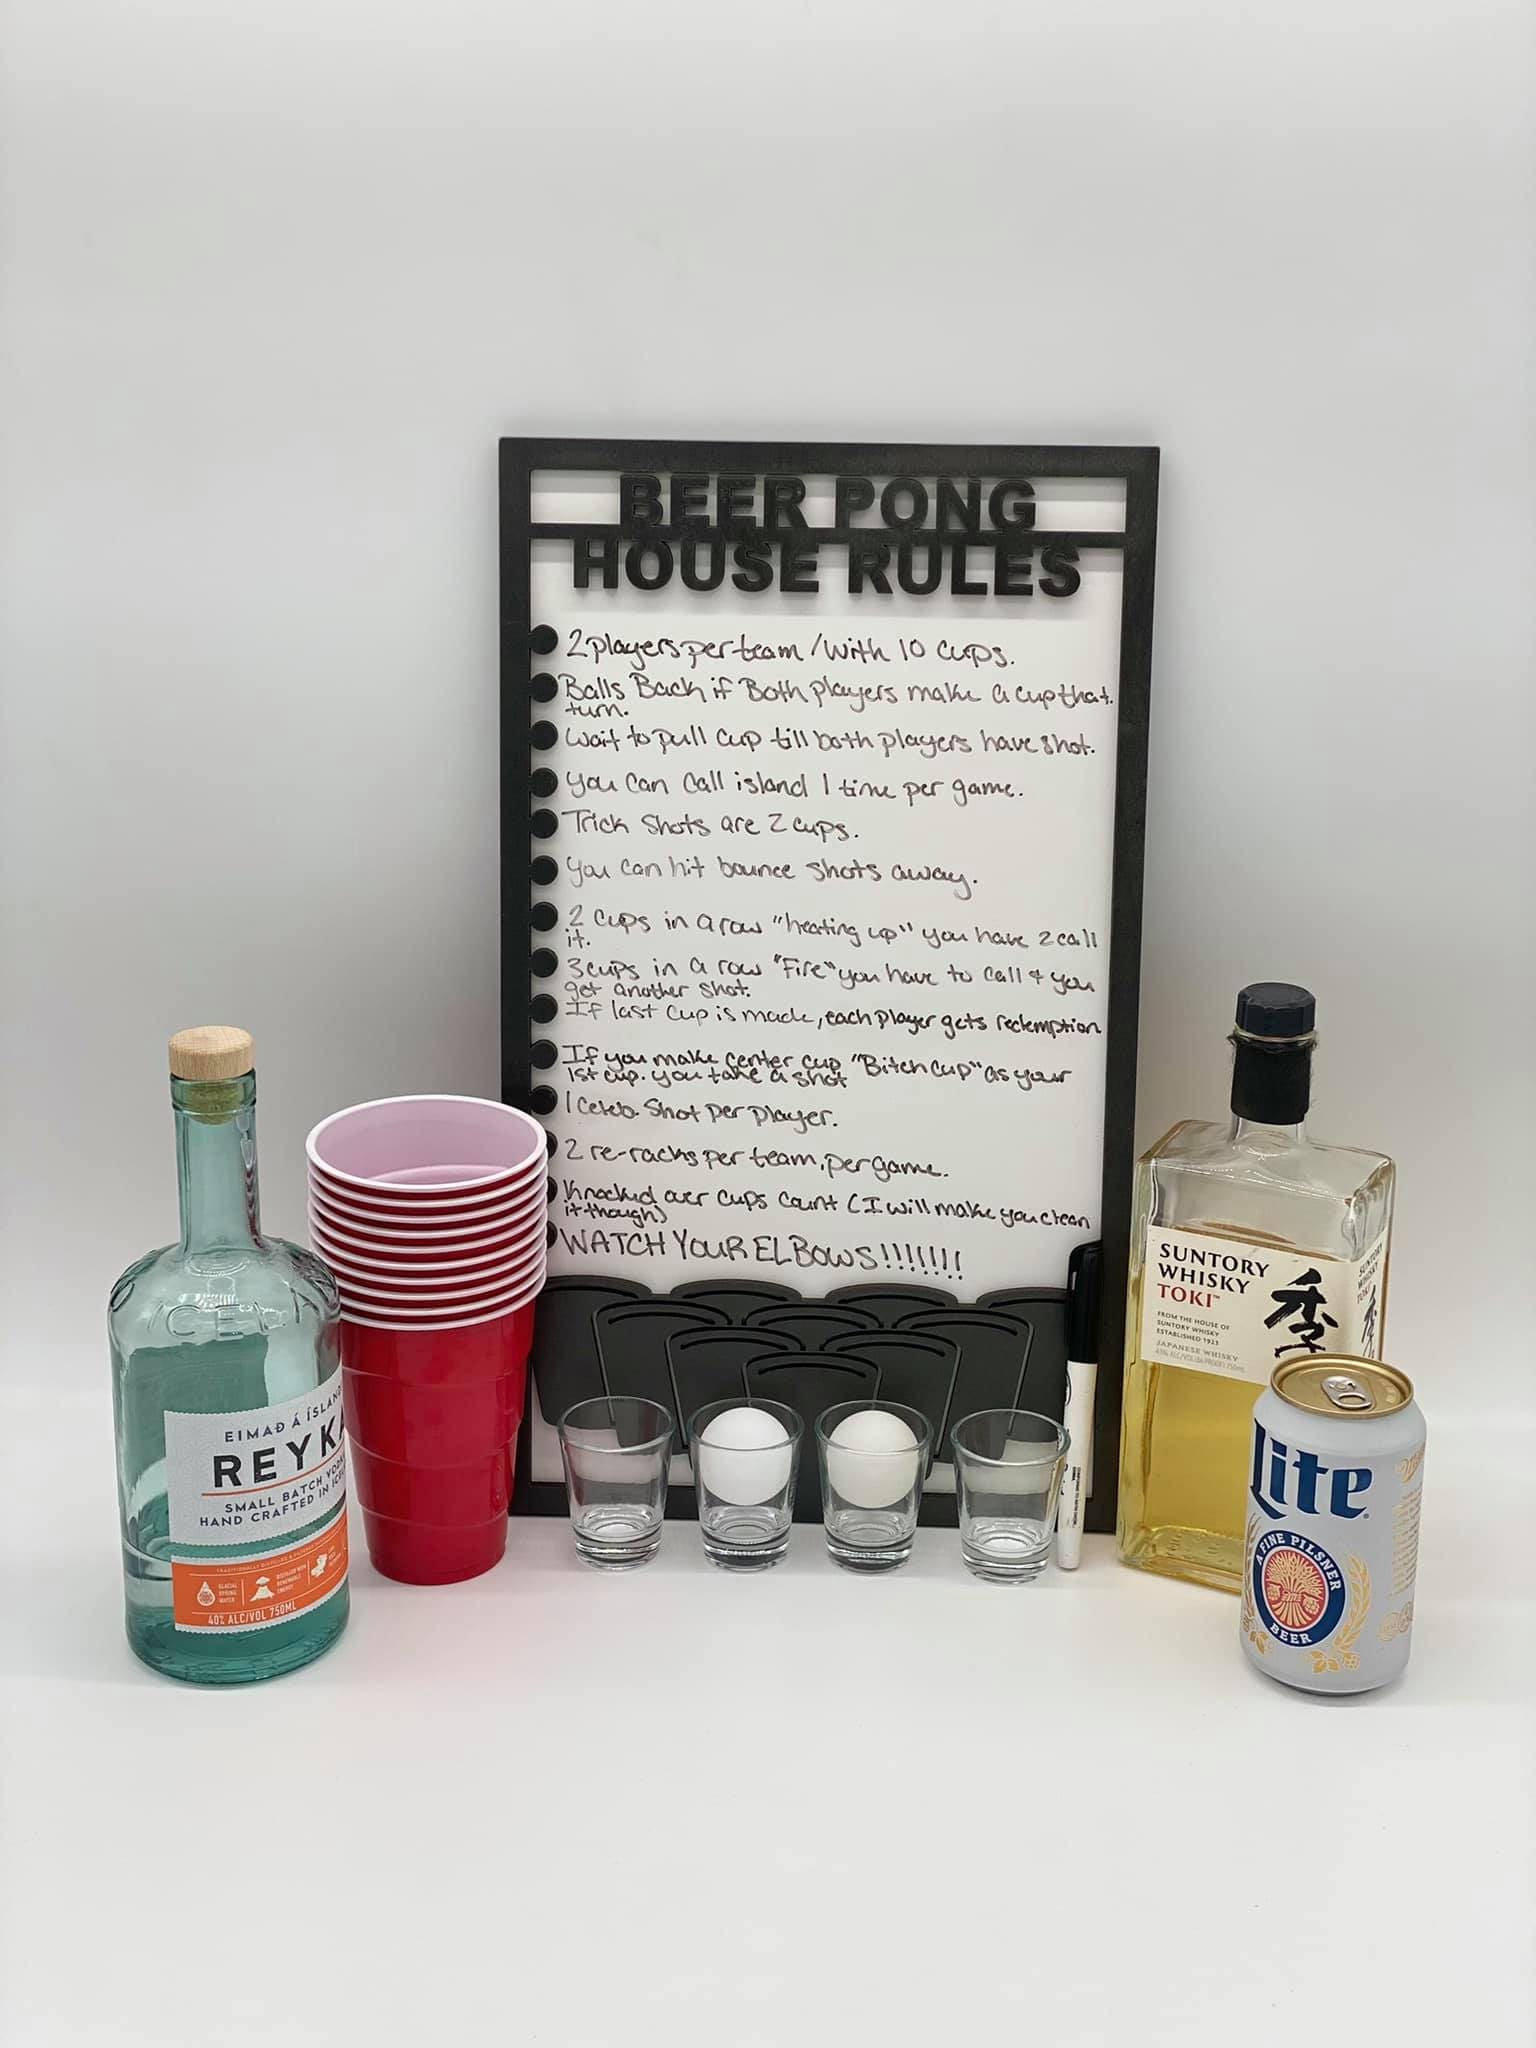 Fireball Beer Pong Kit - Bounce and Sip in Style